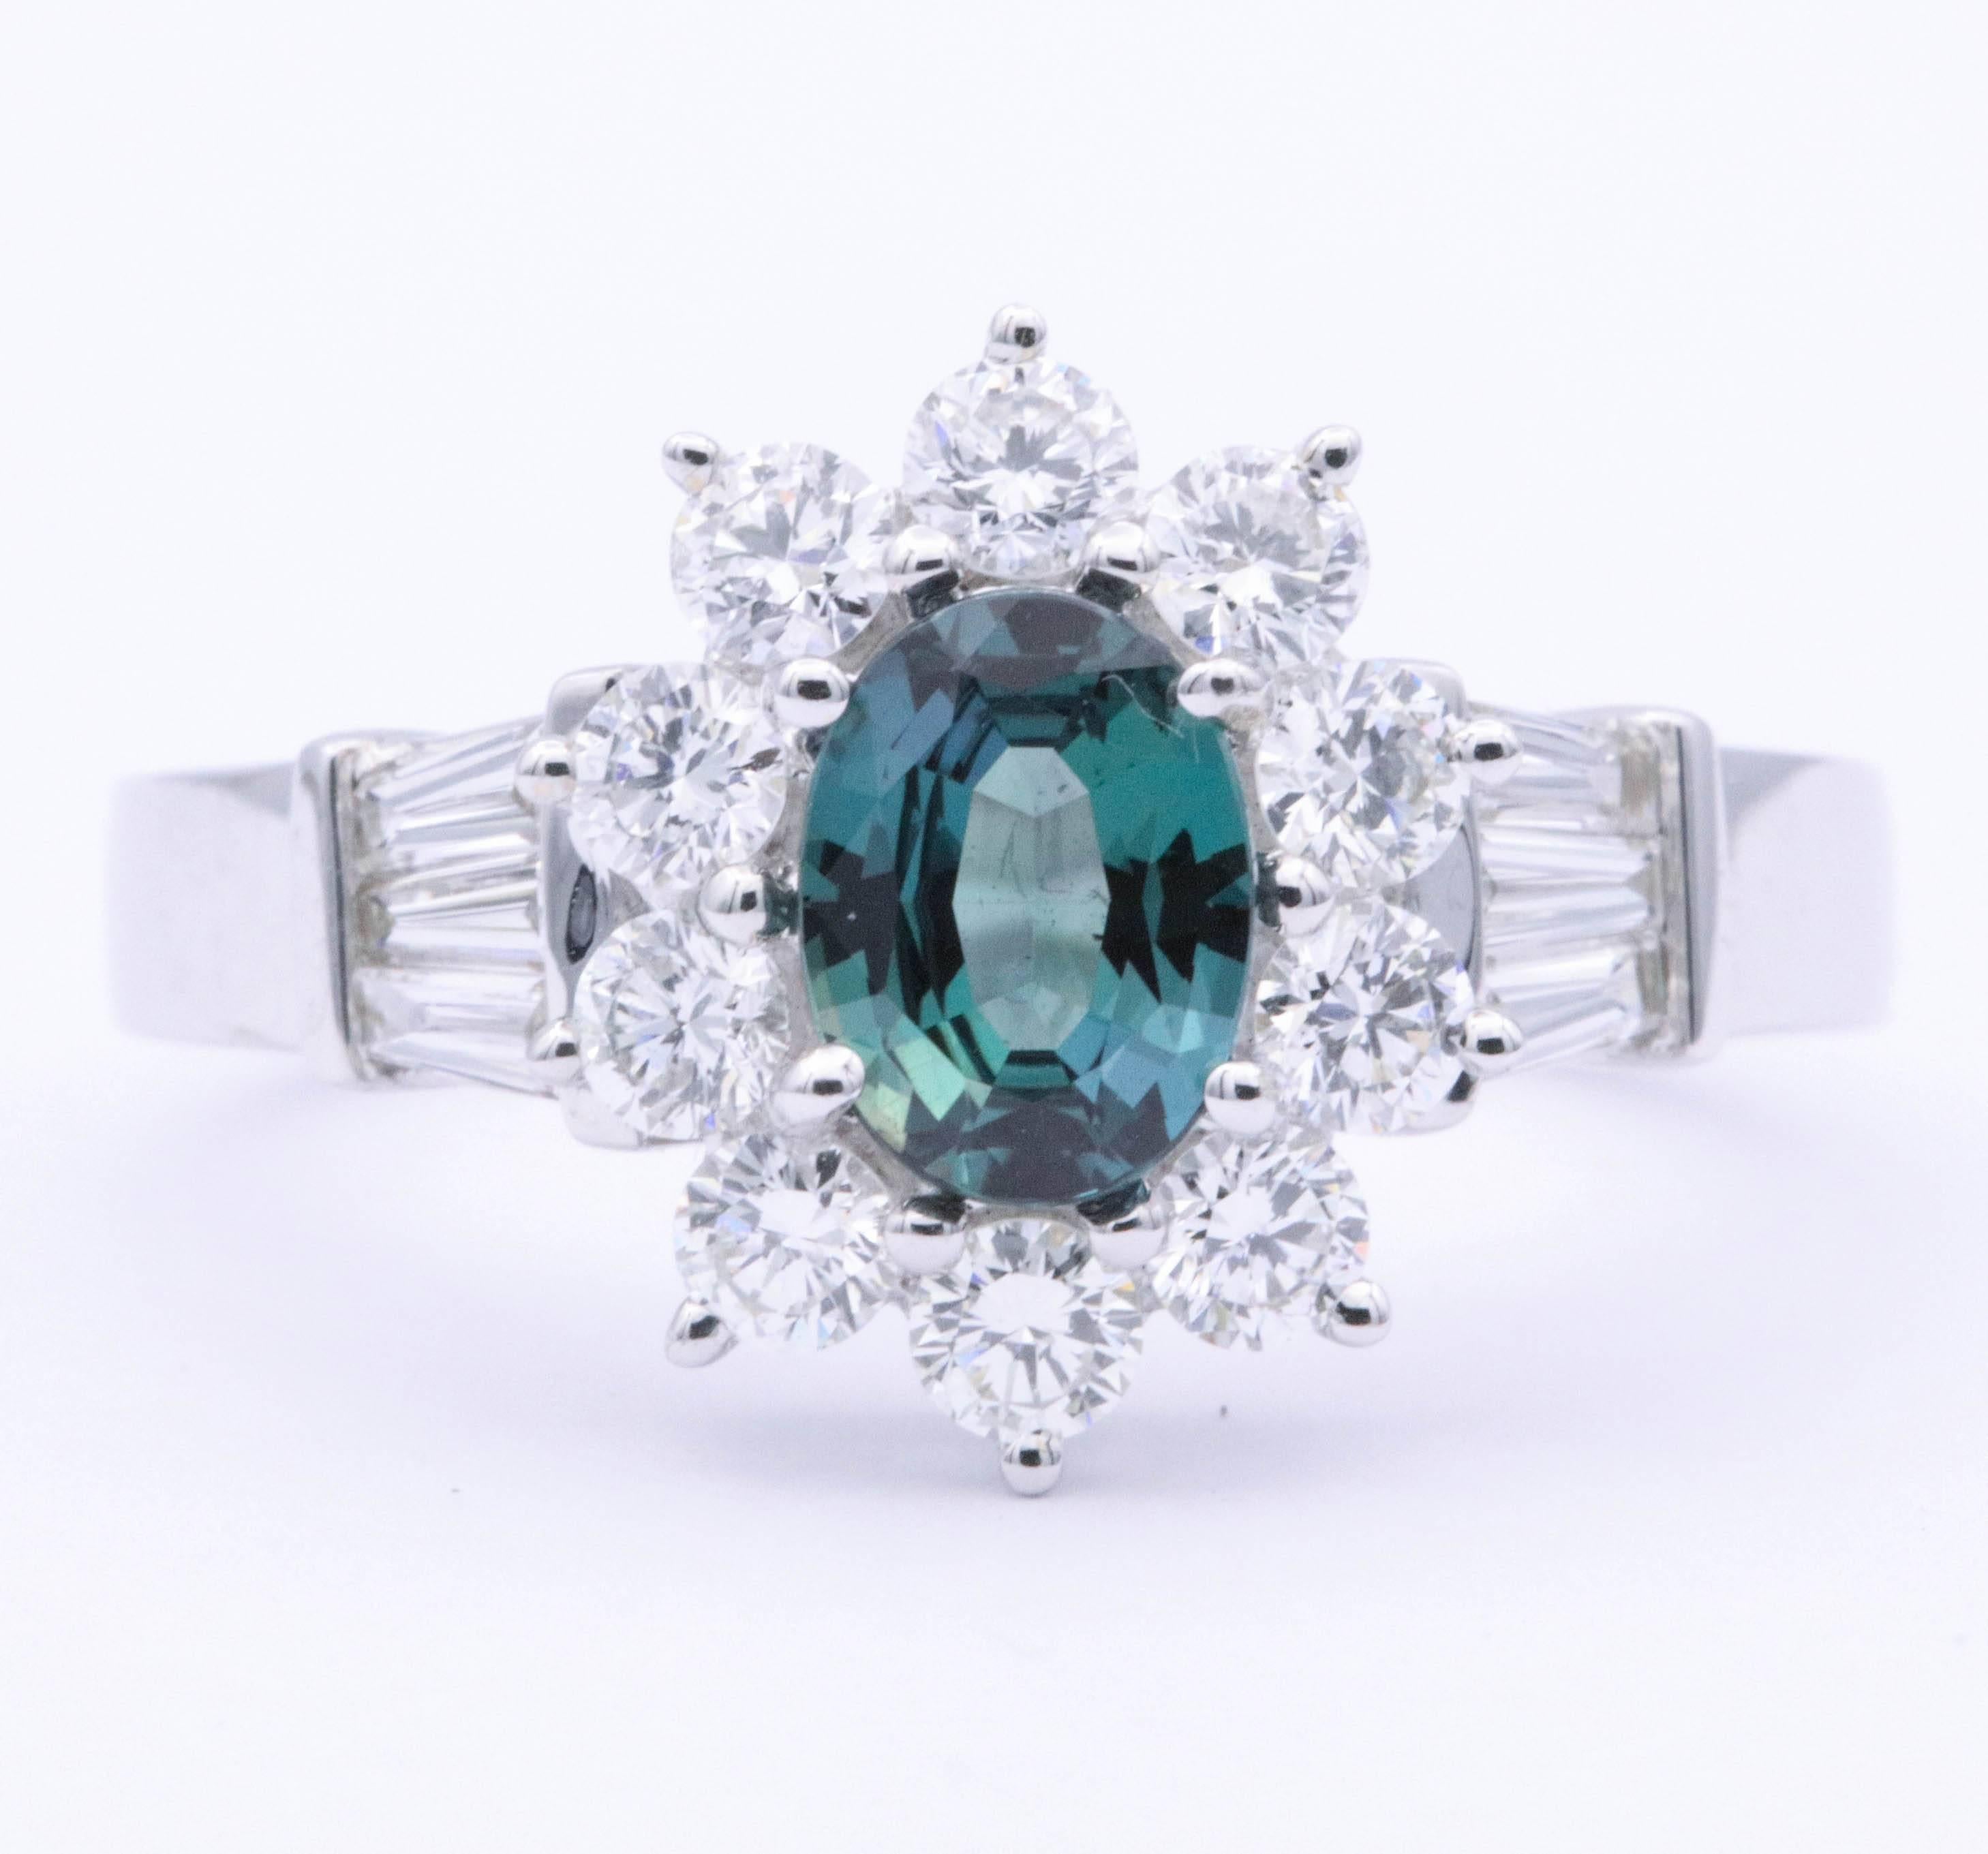 18K White Gold
Alexandrite 0.67 Carats
Diamonds 0.87 Carats
Certificate available